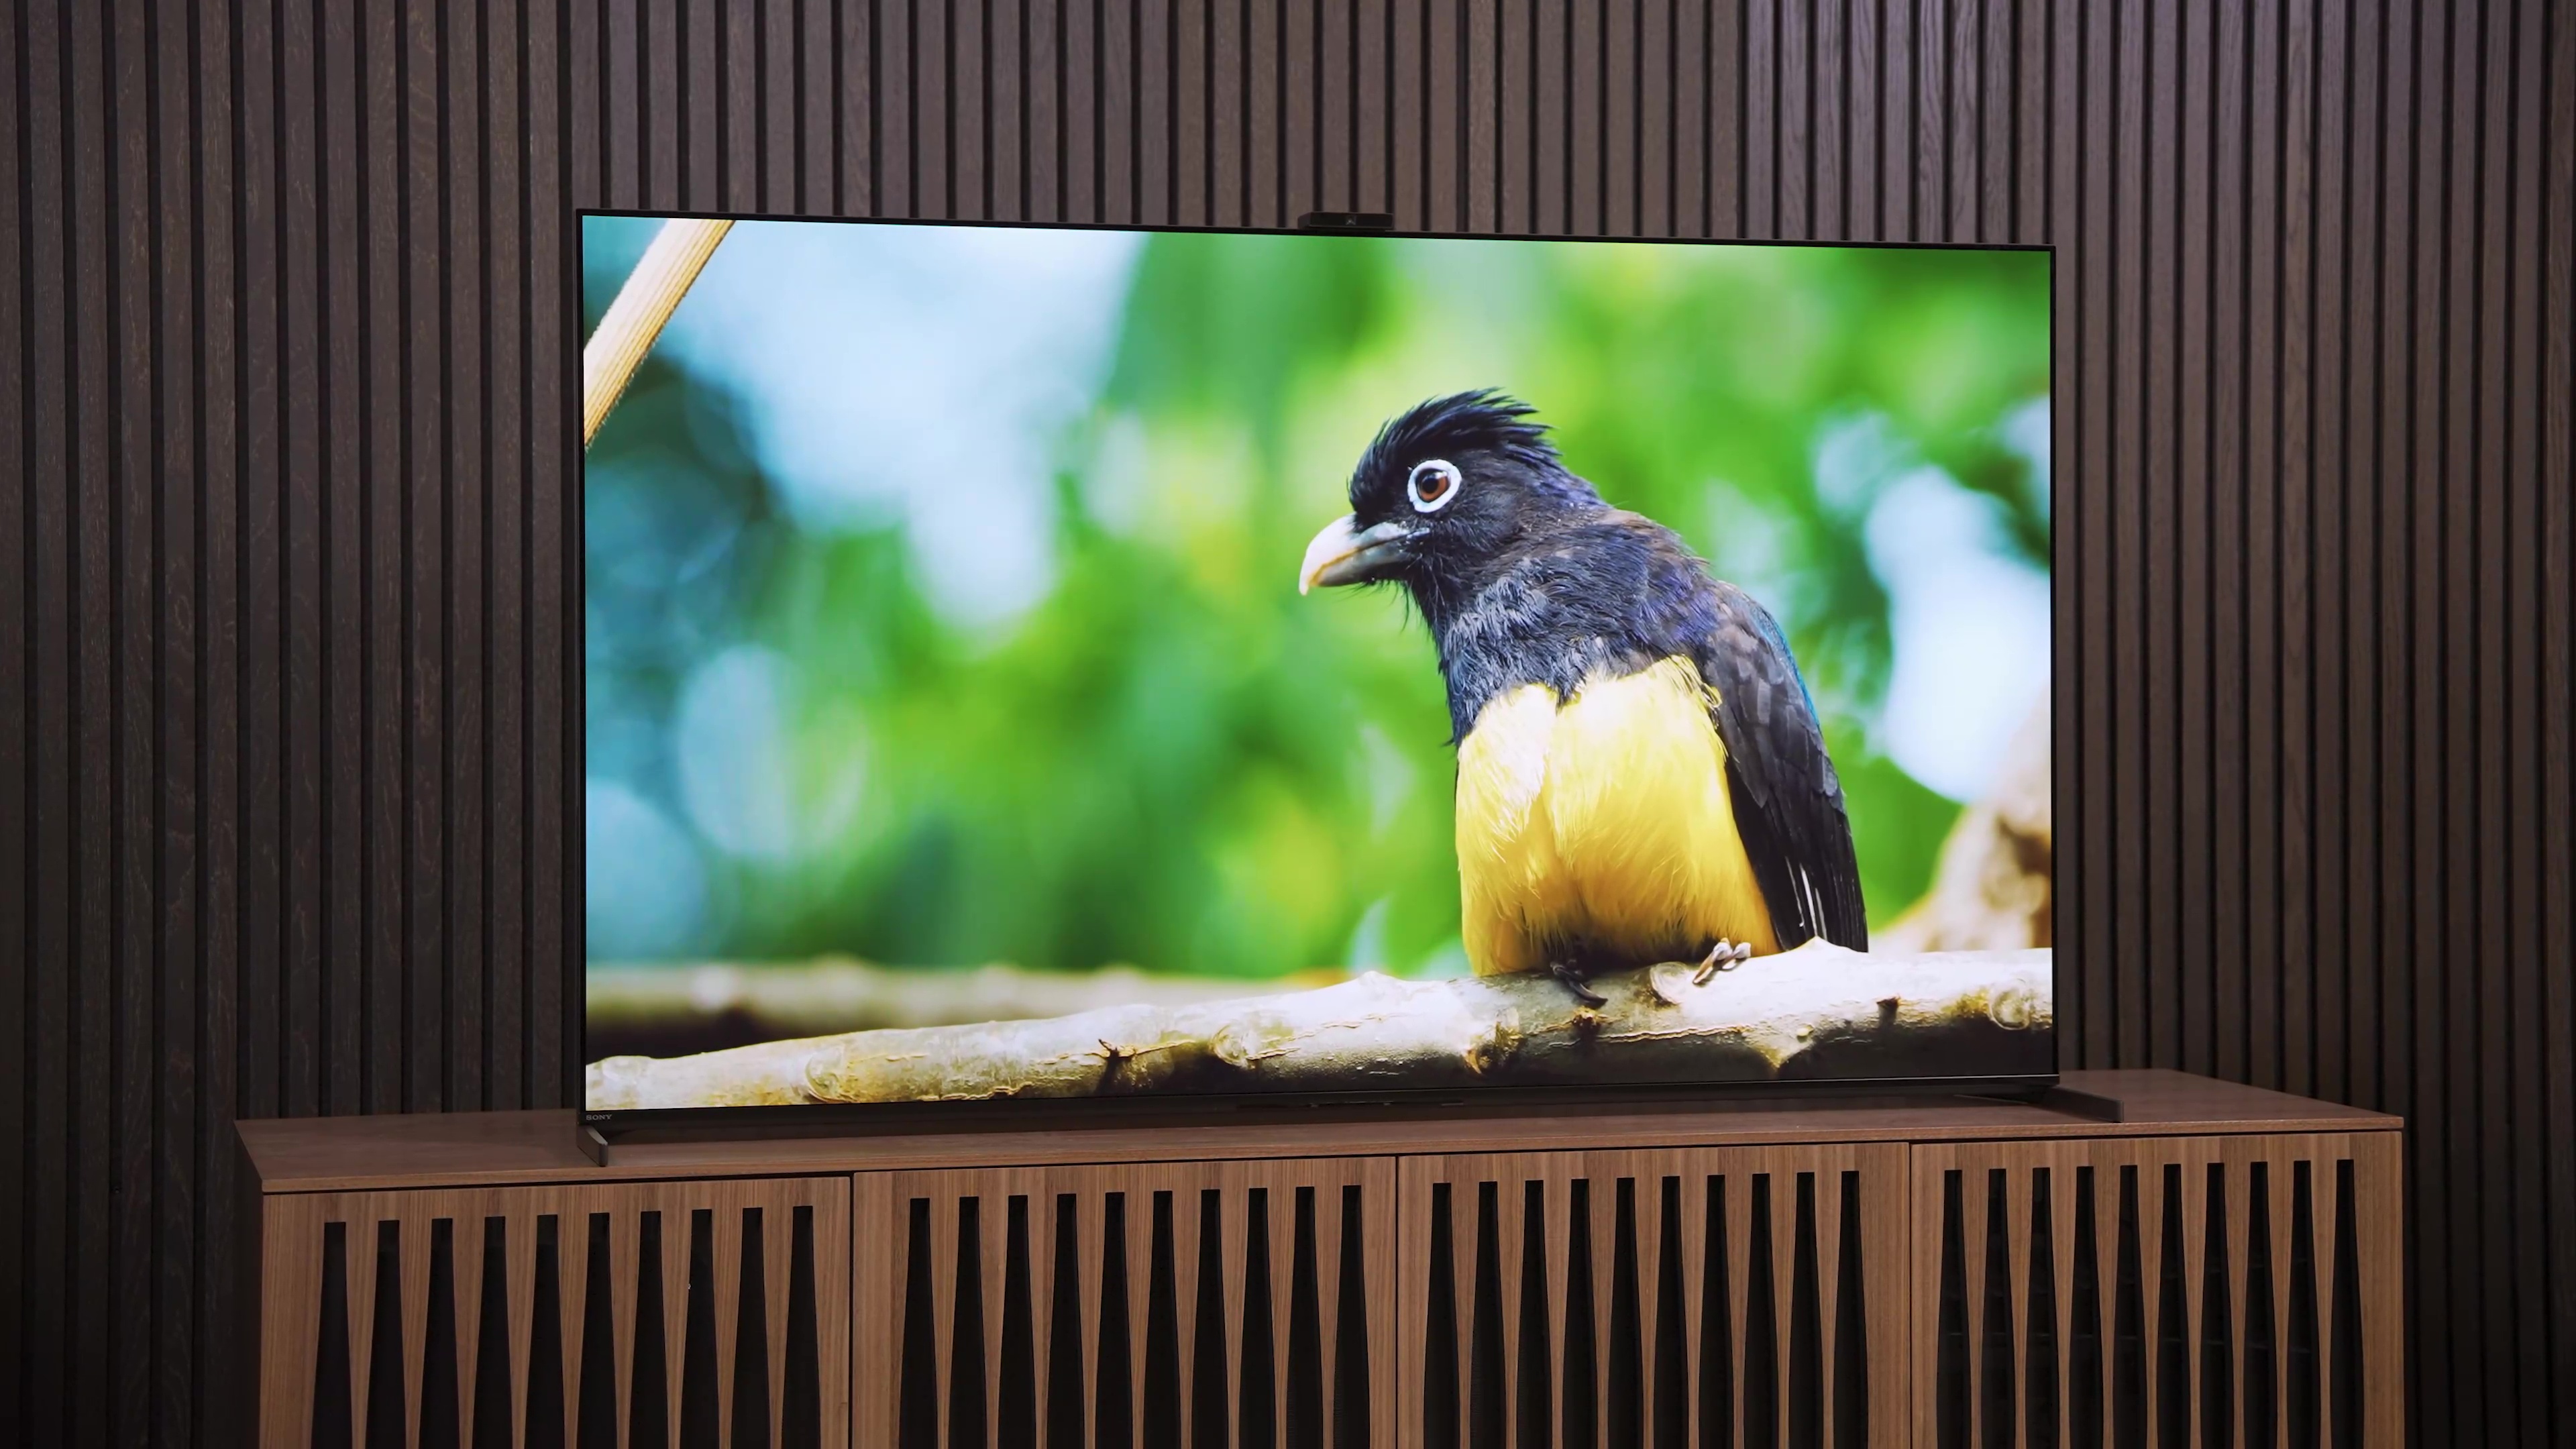 Mi Box is an affordable 4K HDR streamer, but dragged down by Android TV